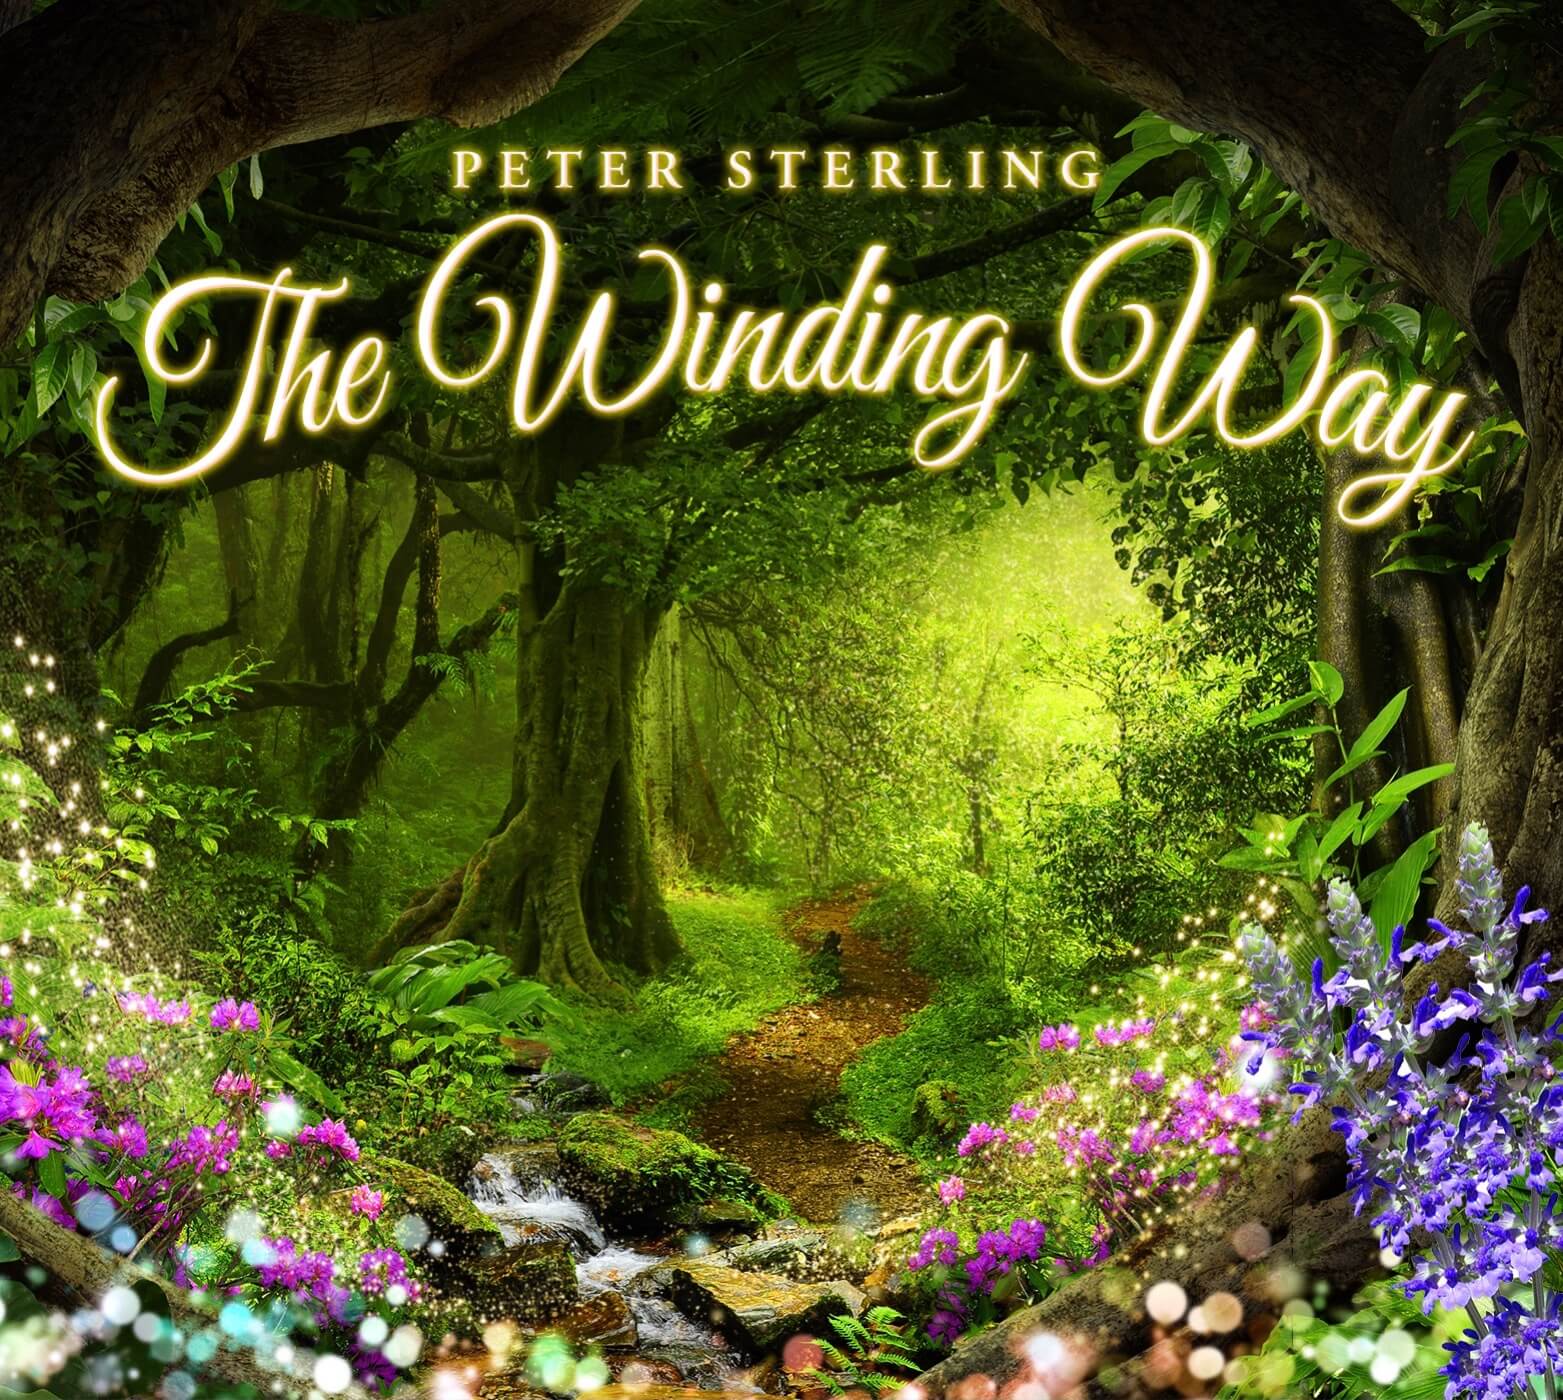 Exciting unexpected twists and turns Peter Sterling